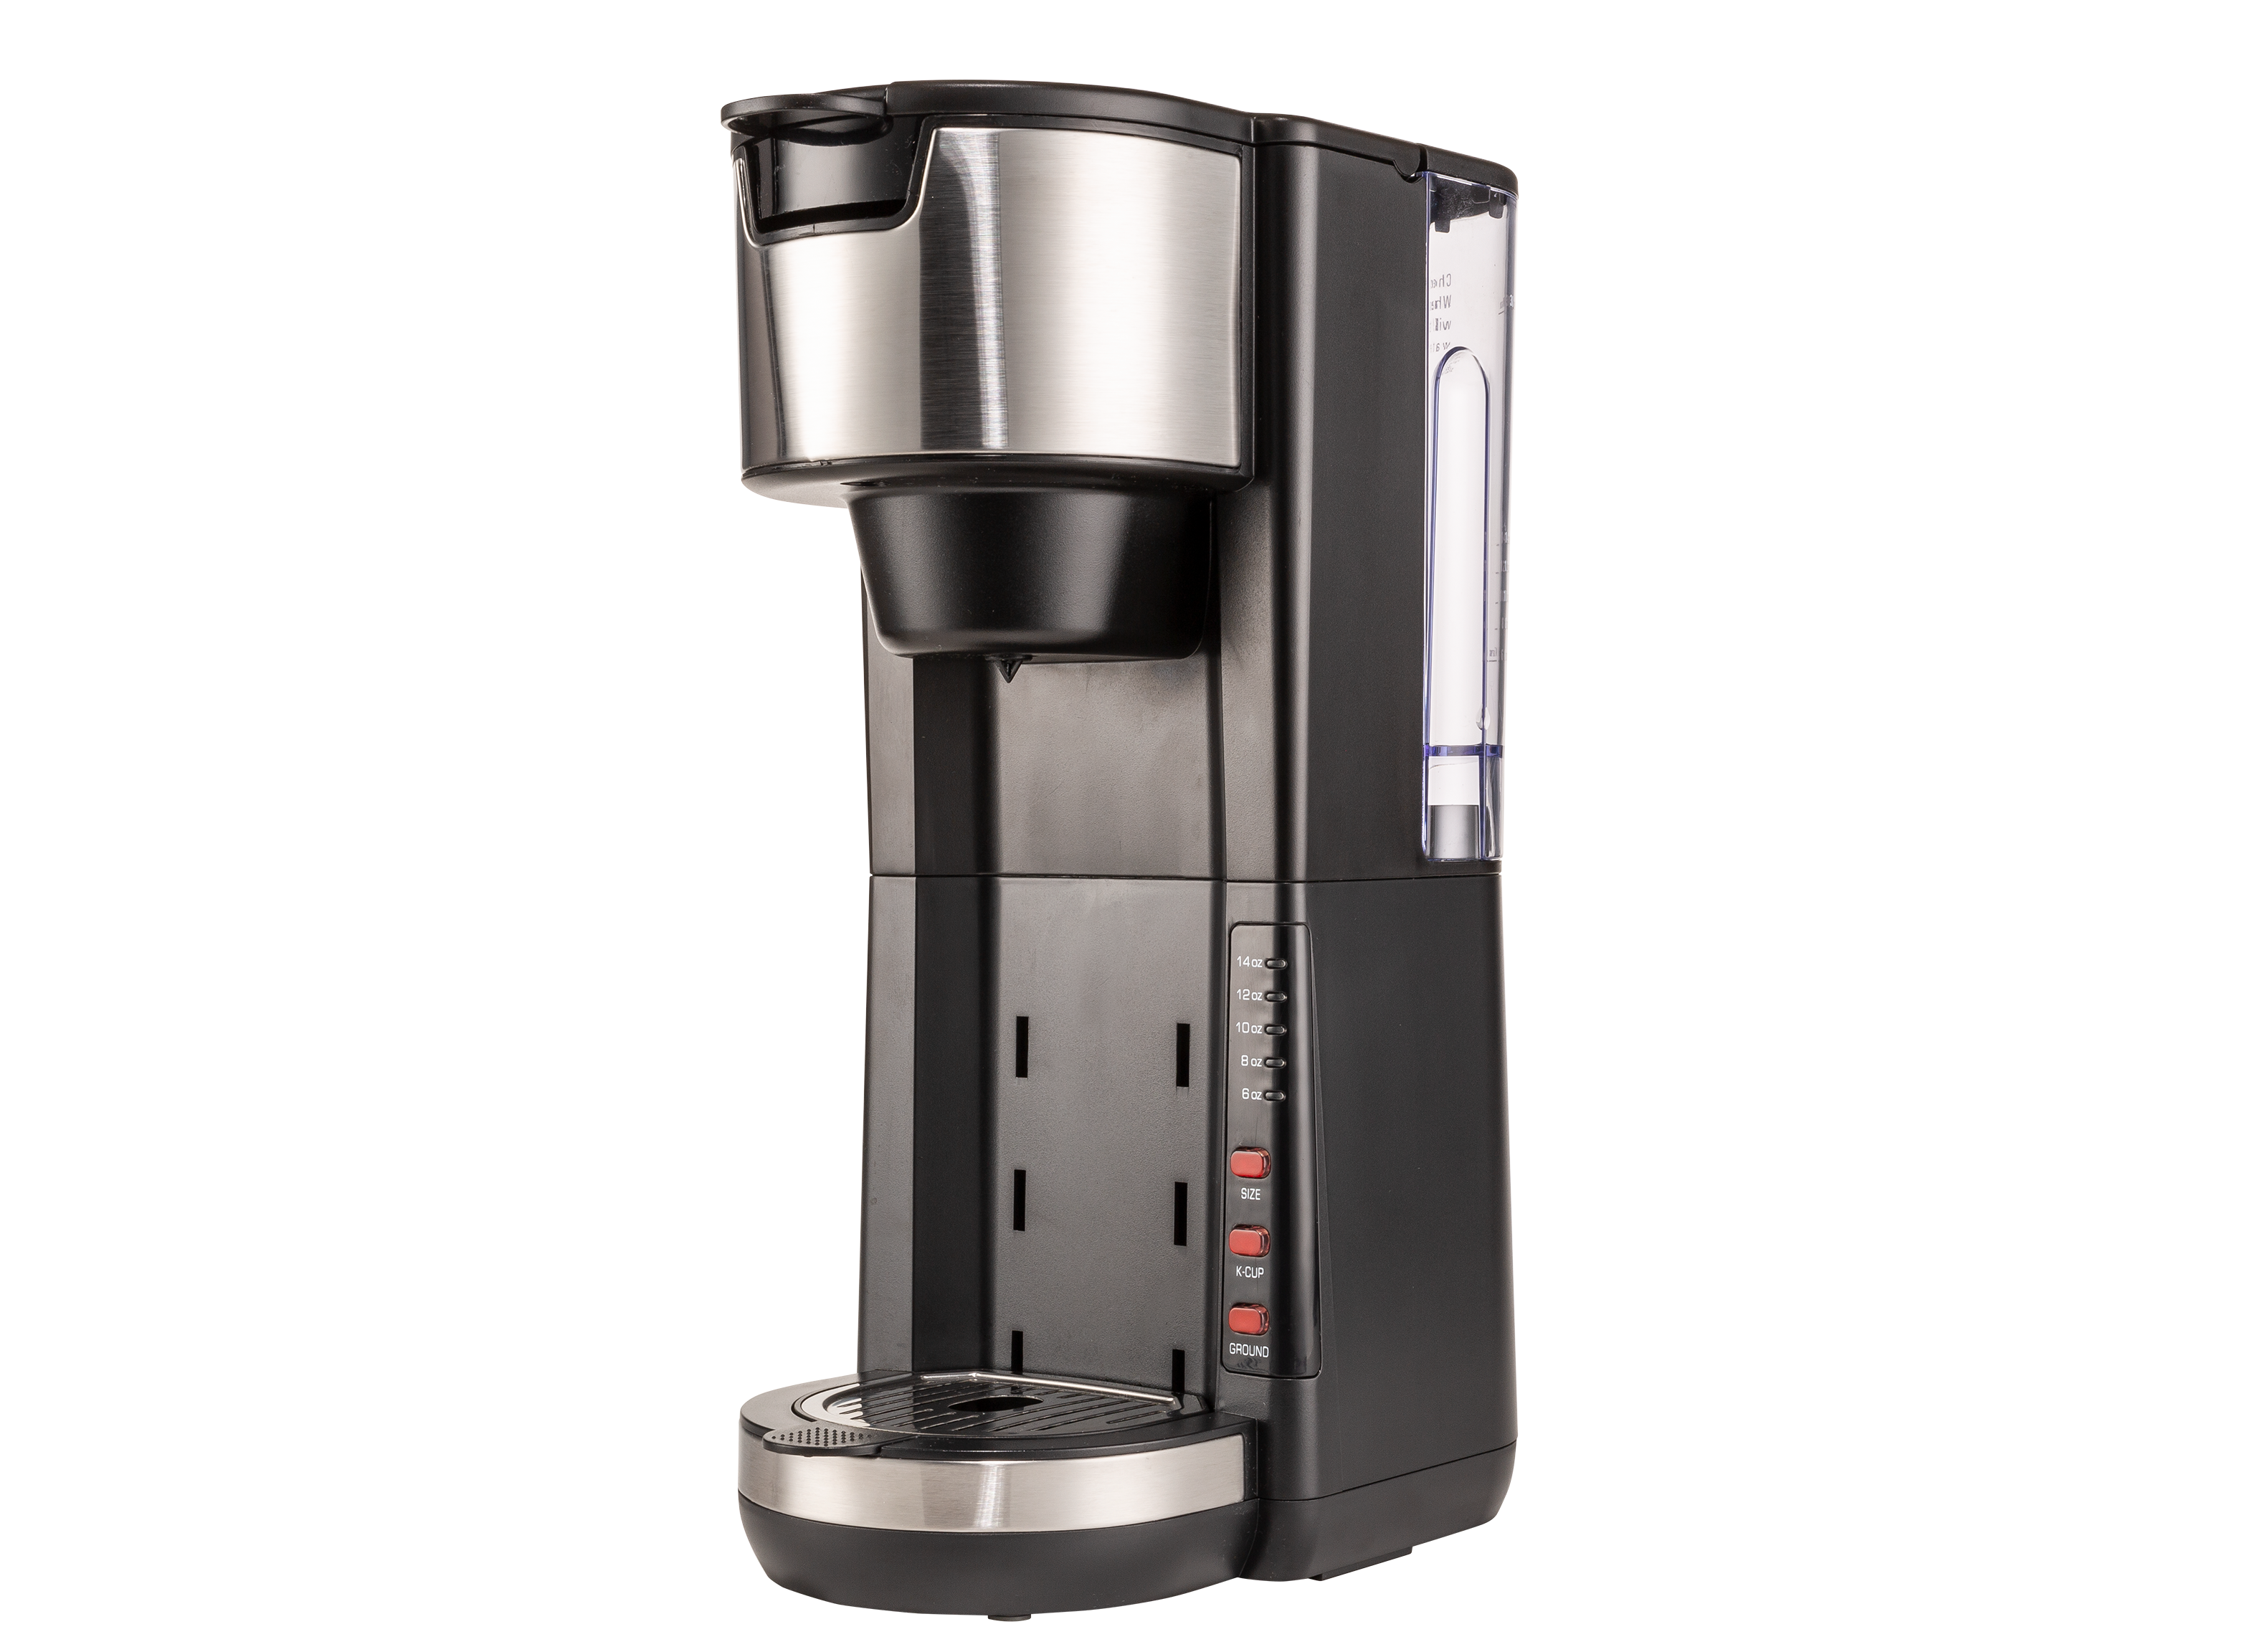 Mixpresso 2-in-1 Single Cup Coffee Maker Coffee Maker Review